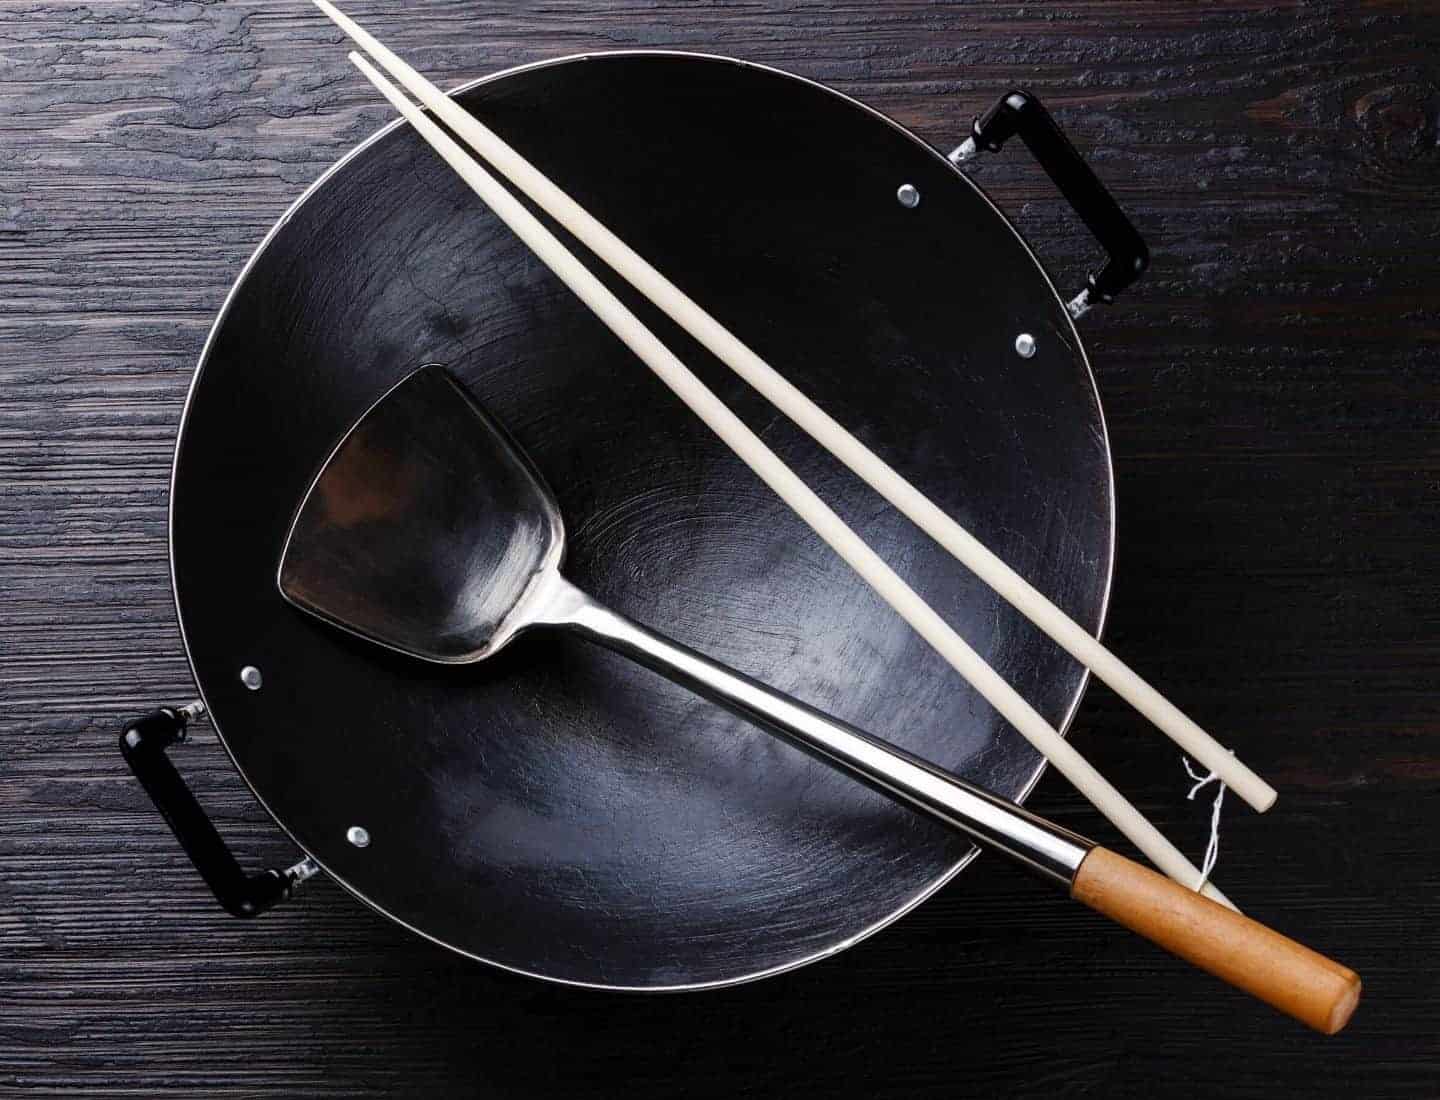 A wok, shovel and chopsticks are all essential Thai cooking utensils